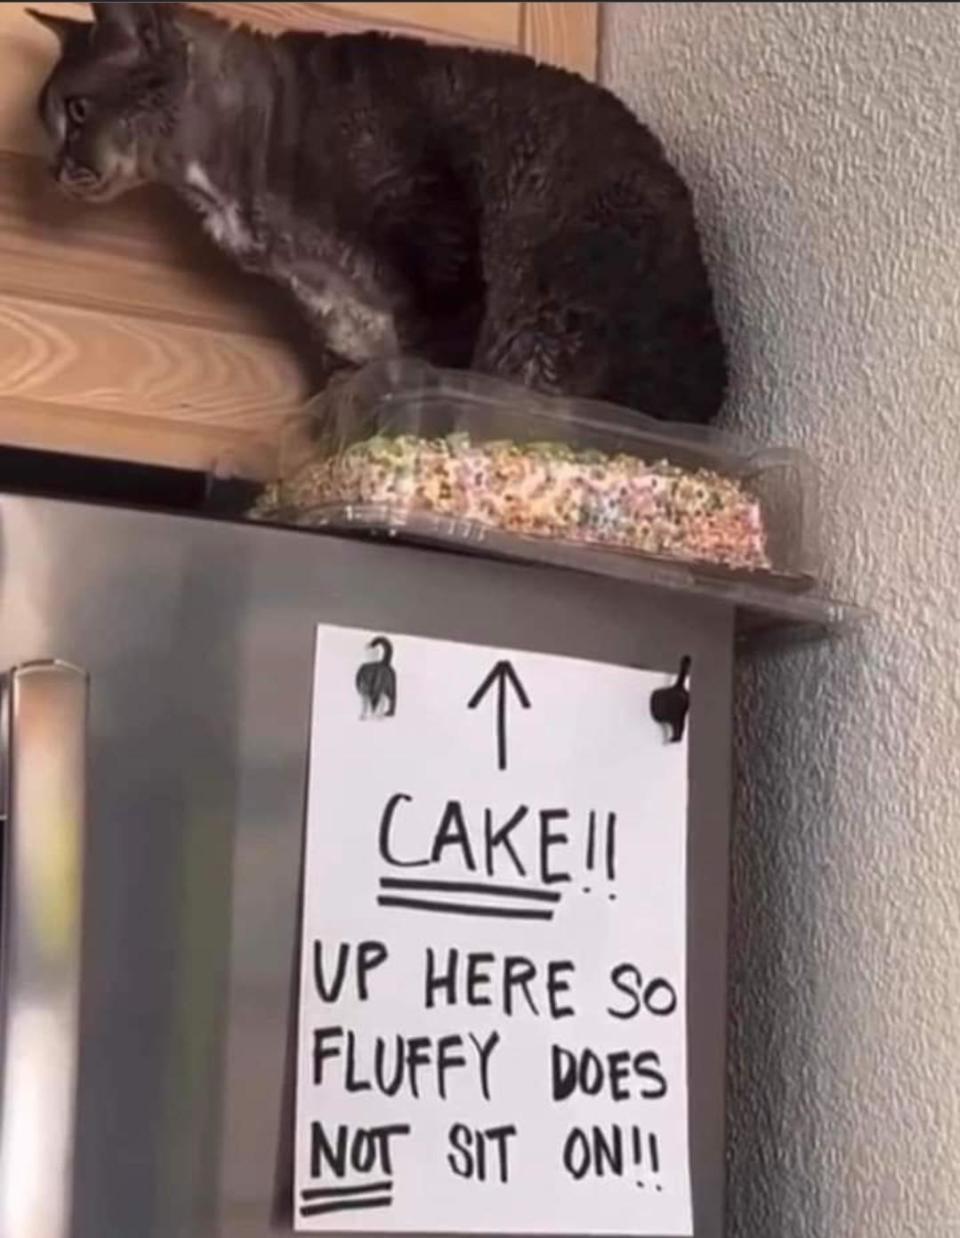 The cat is sitting on the cake, which is on top of a fridge that has a sign with an arrow pointing up that says: "Cake!!  Don't sit here until fluffy!!"